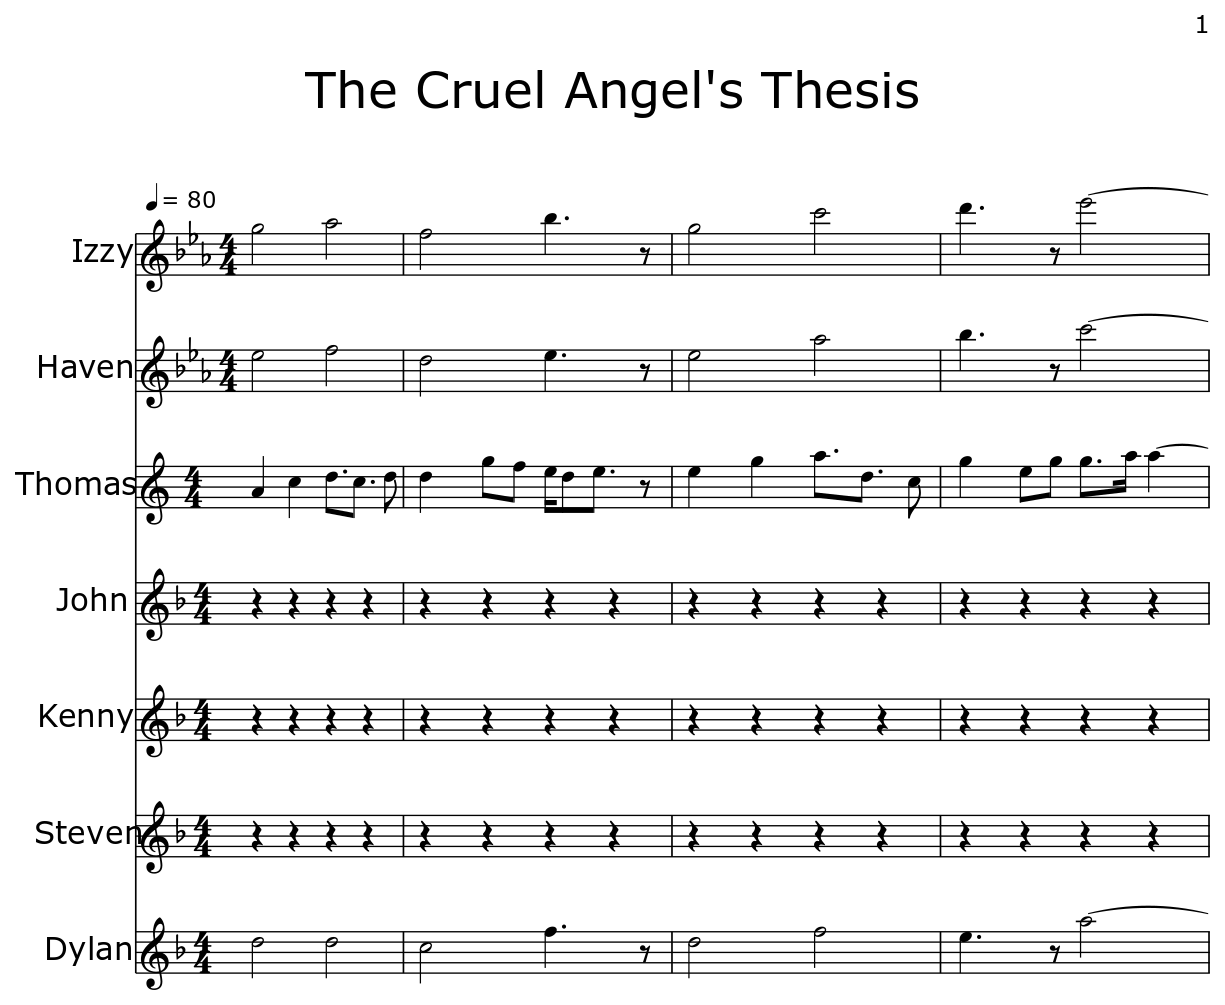 a cruel angel's thesis flute